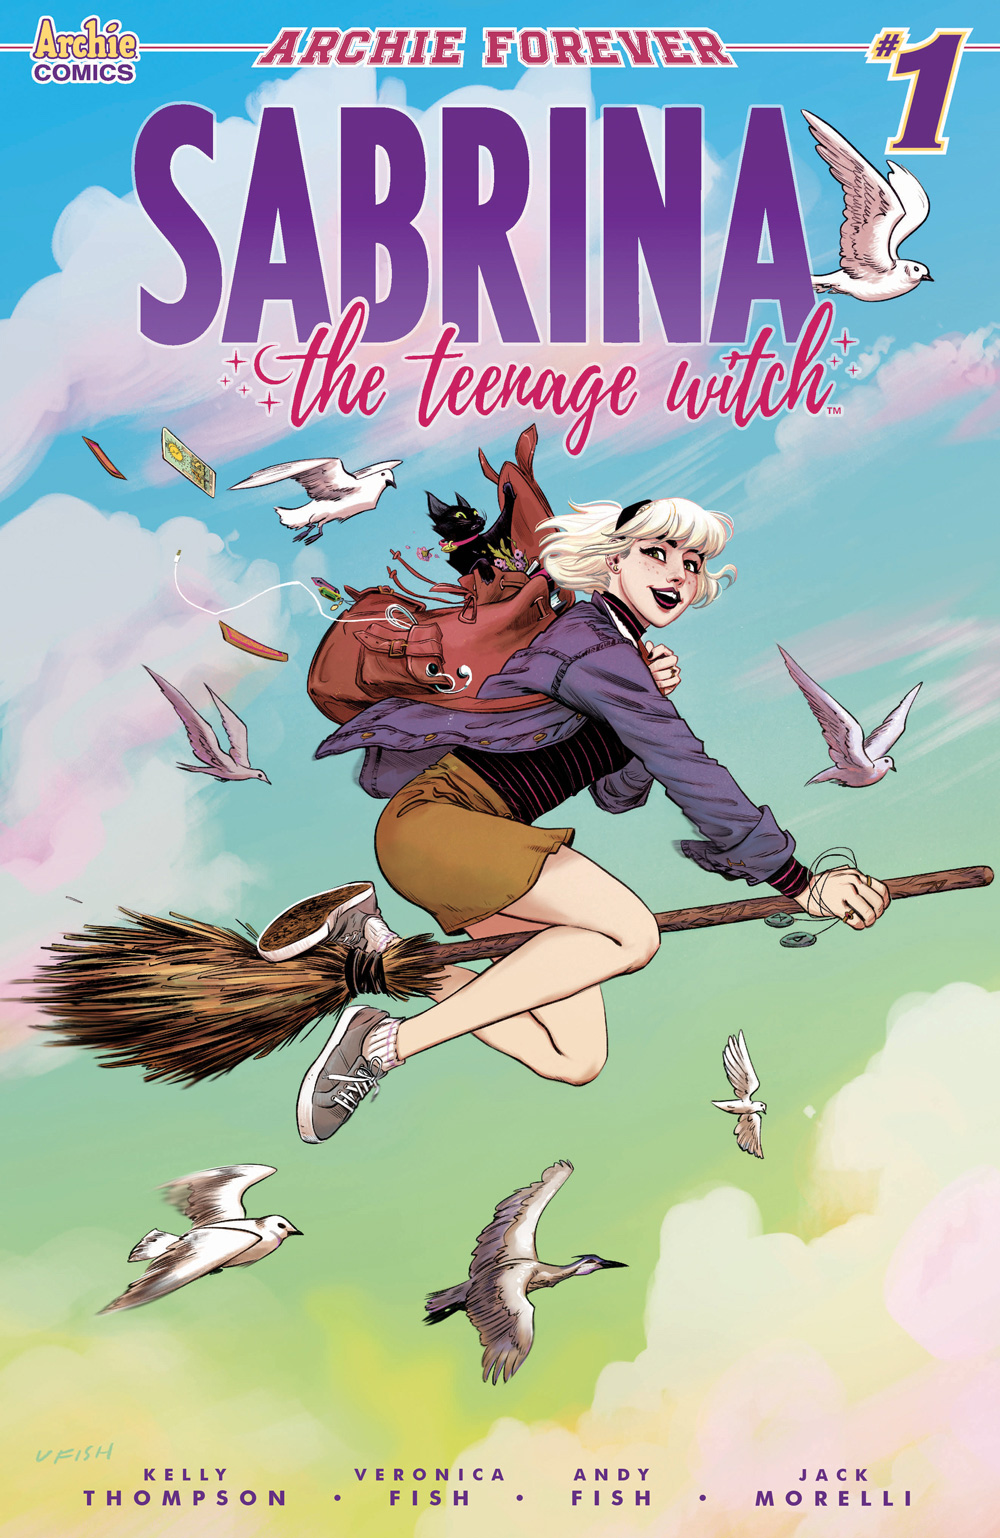 Sabrina The Teenage Witch Is Back In An All New Comic Series Archie